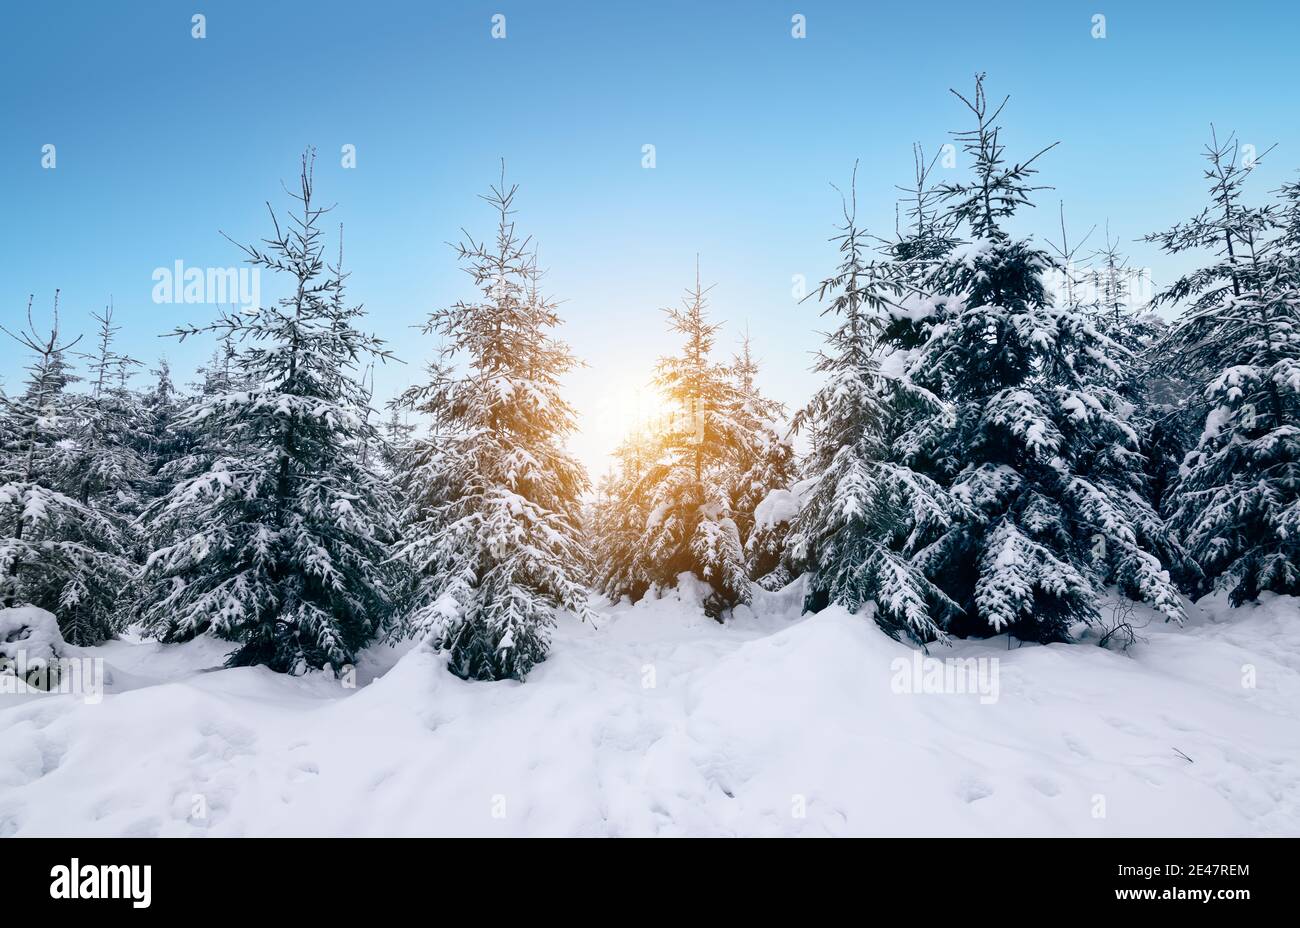 Enchanted snow forest winter landscape. Snow covered evergreen trees at sunset. Stock Photo